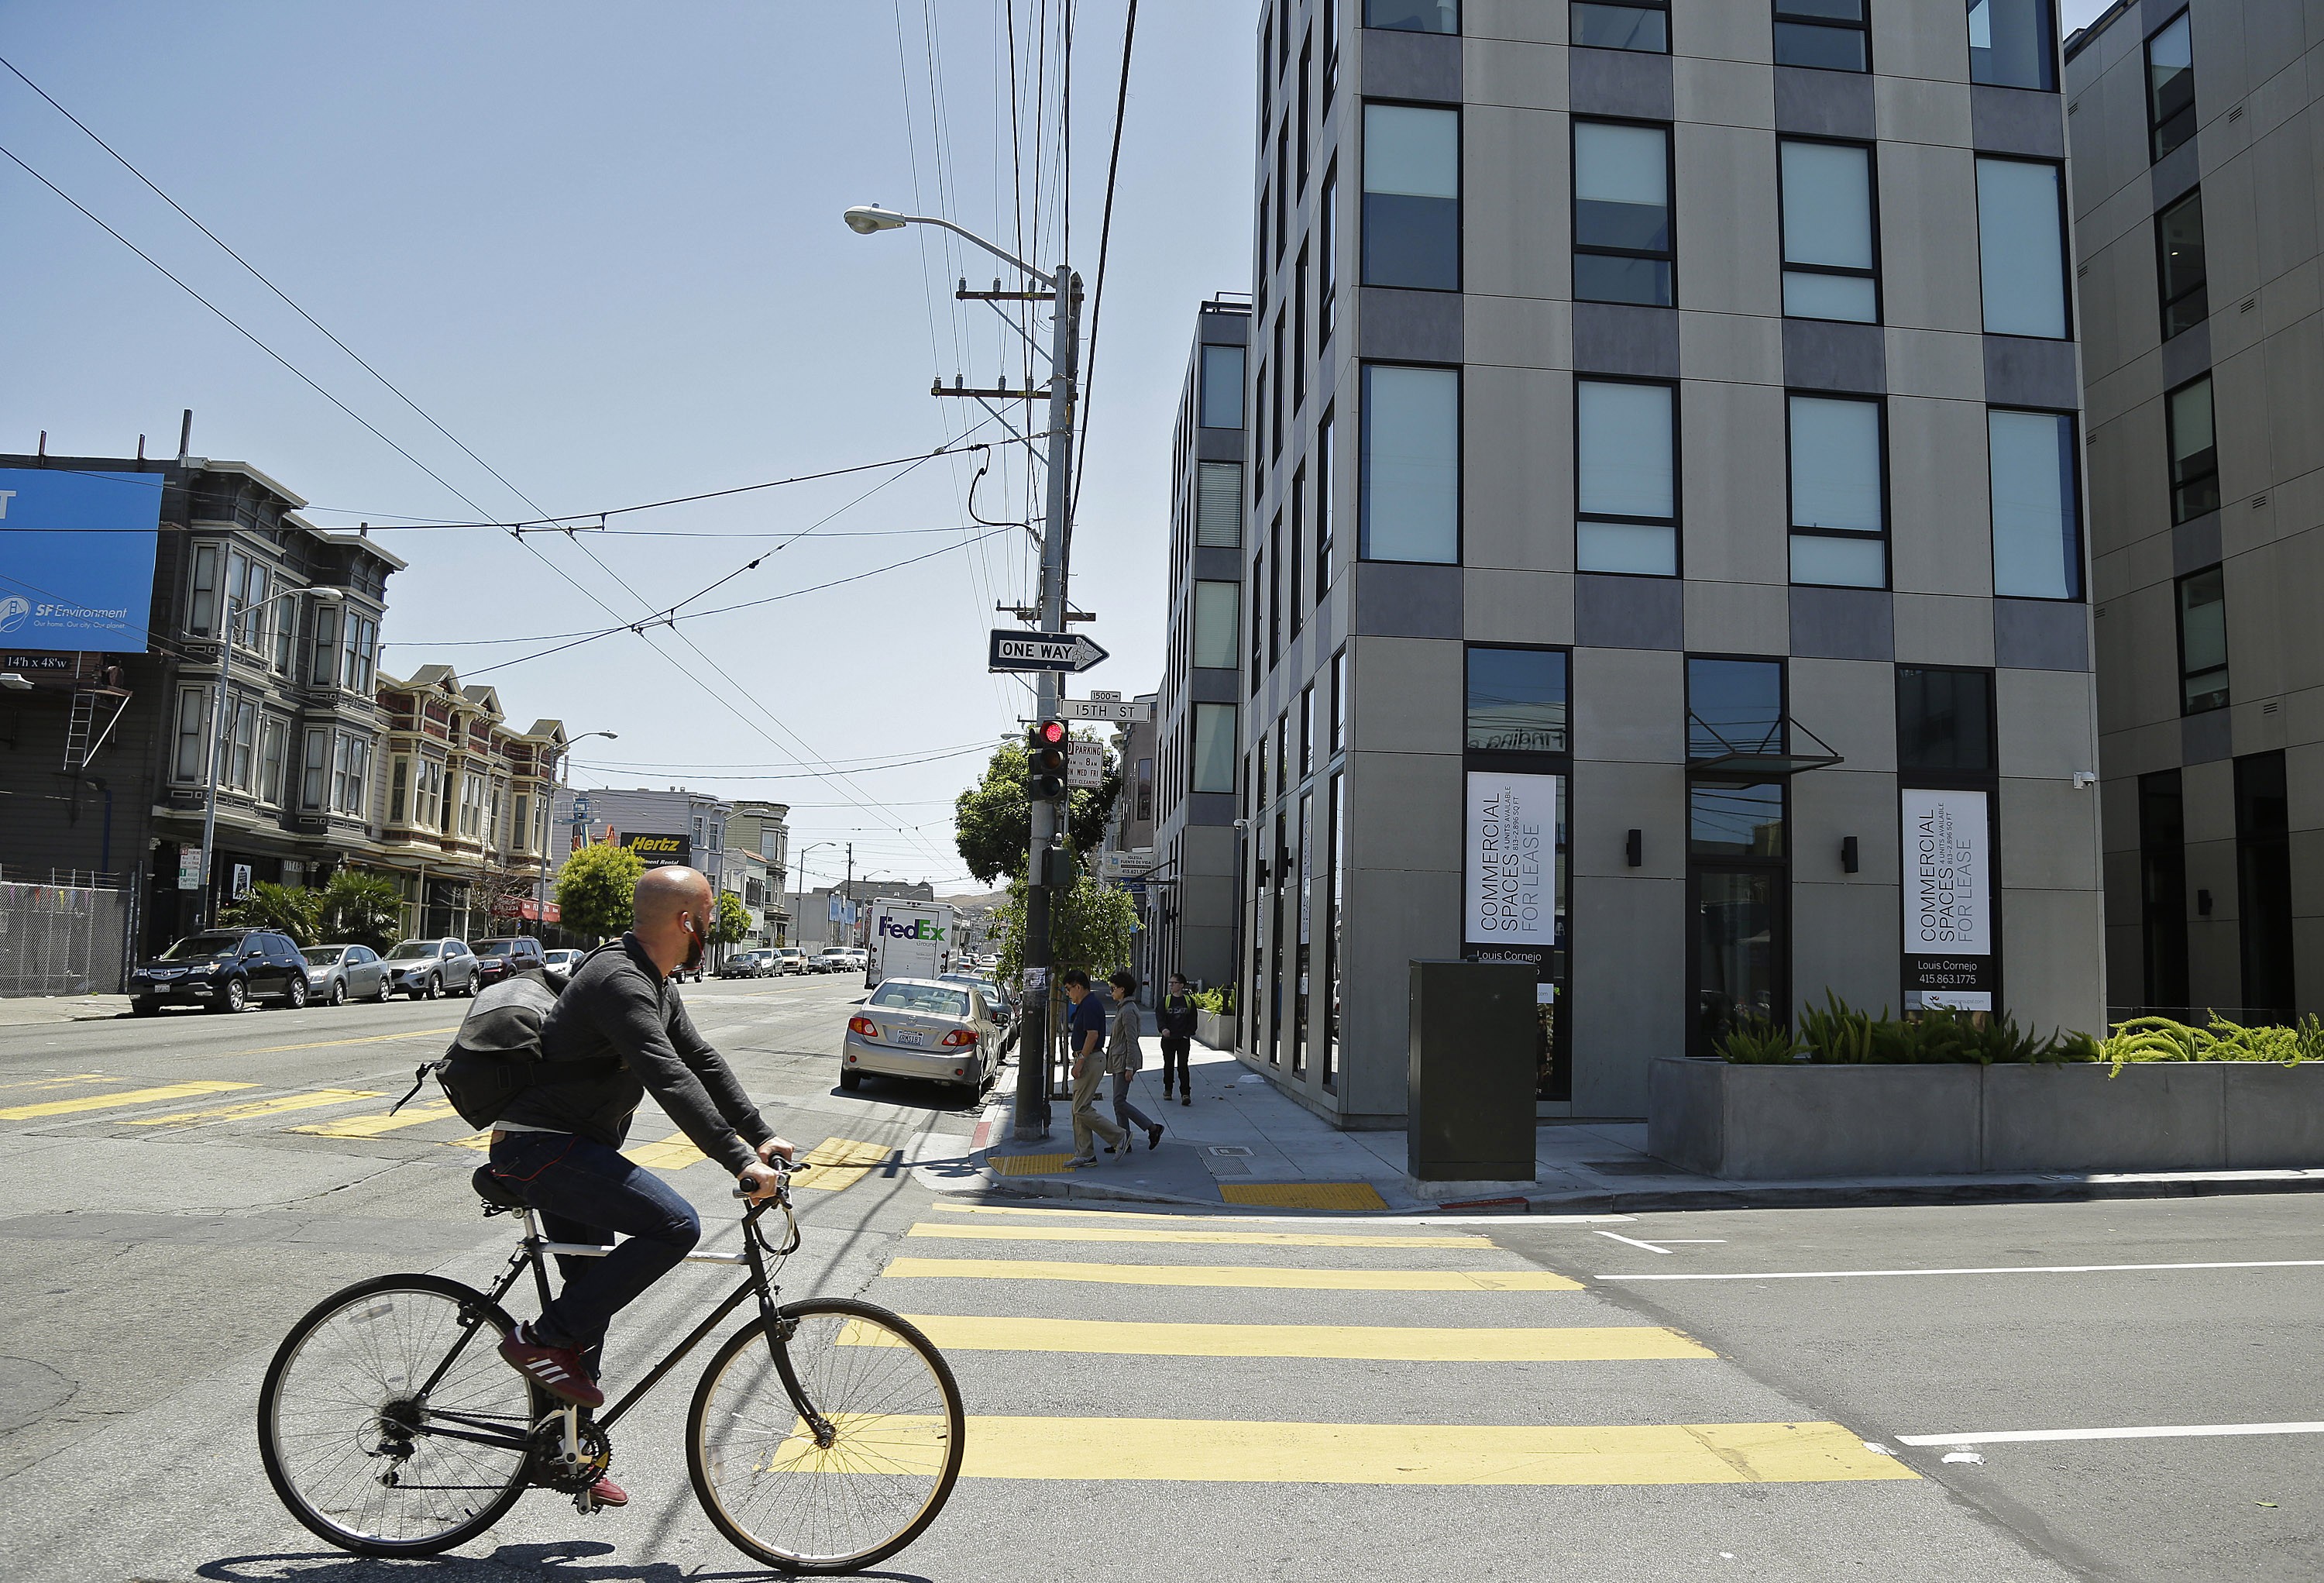 Some residents of San Francisco have abandoned the city in favour of more affordable options in Los Angeles. Photo: AP